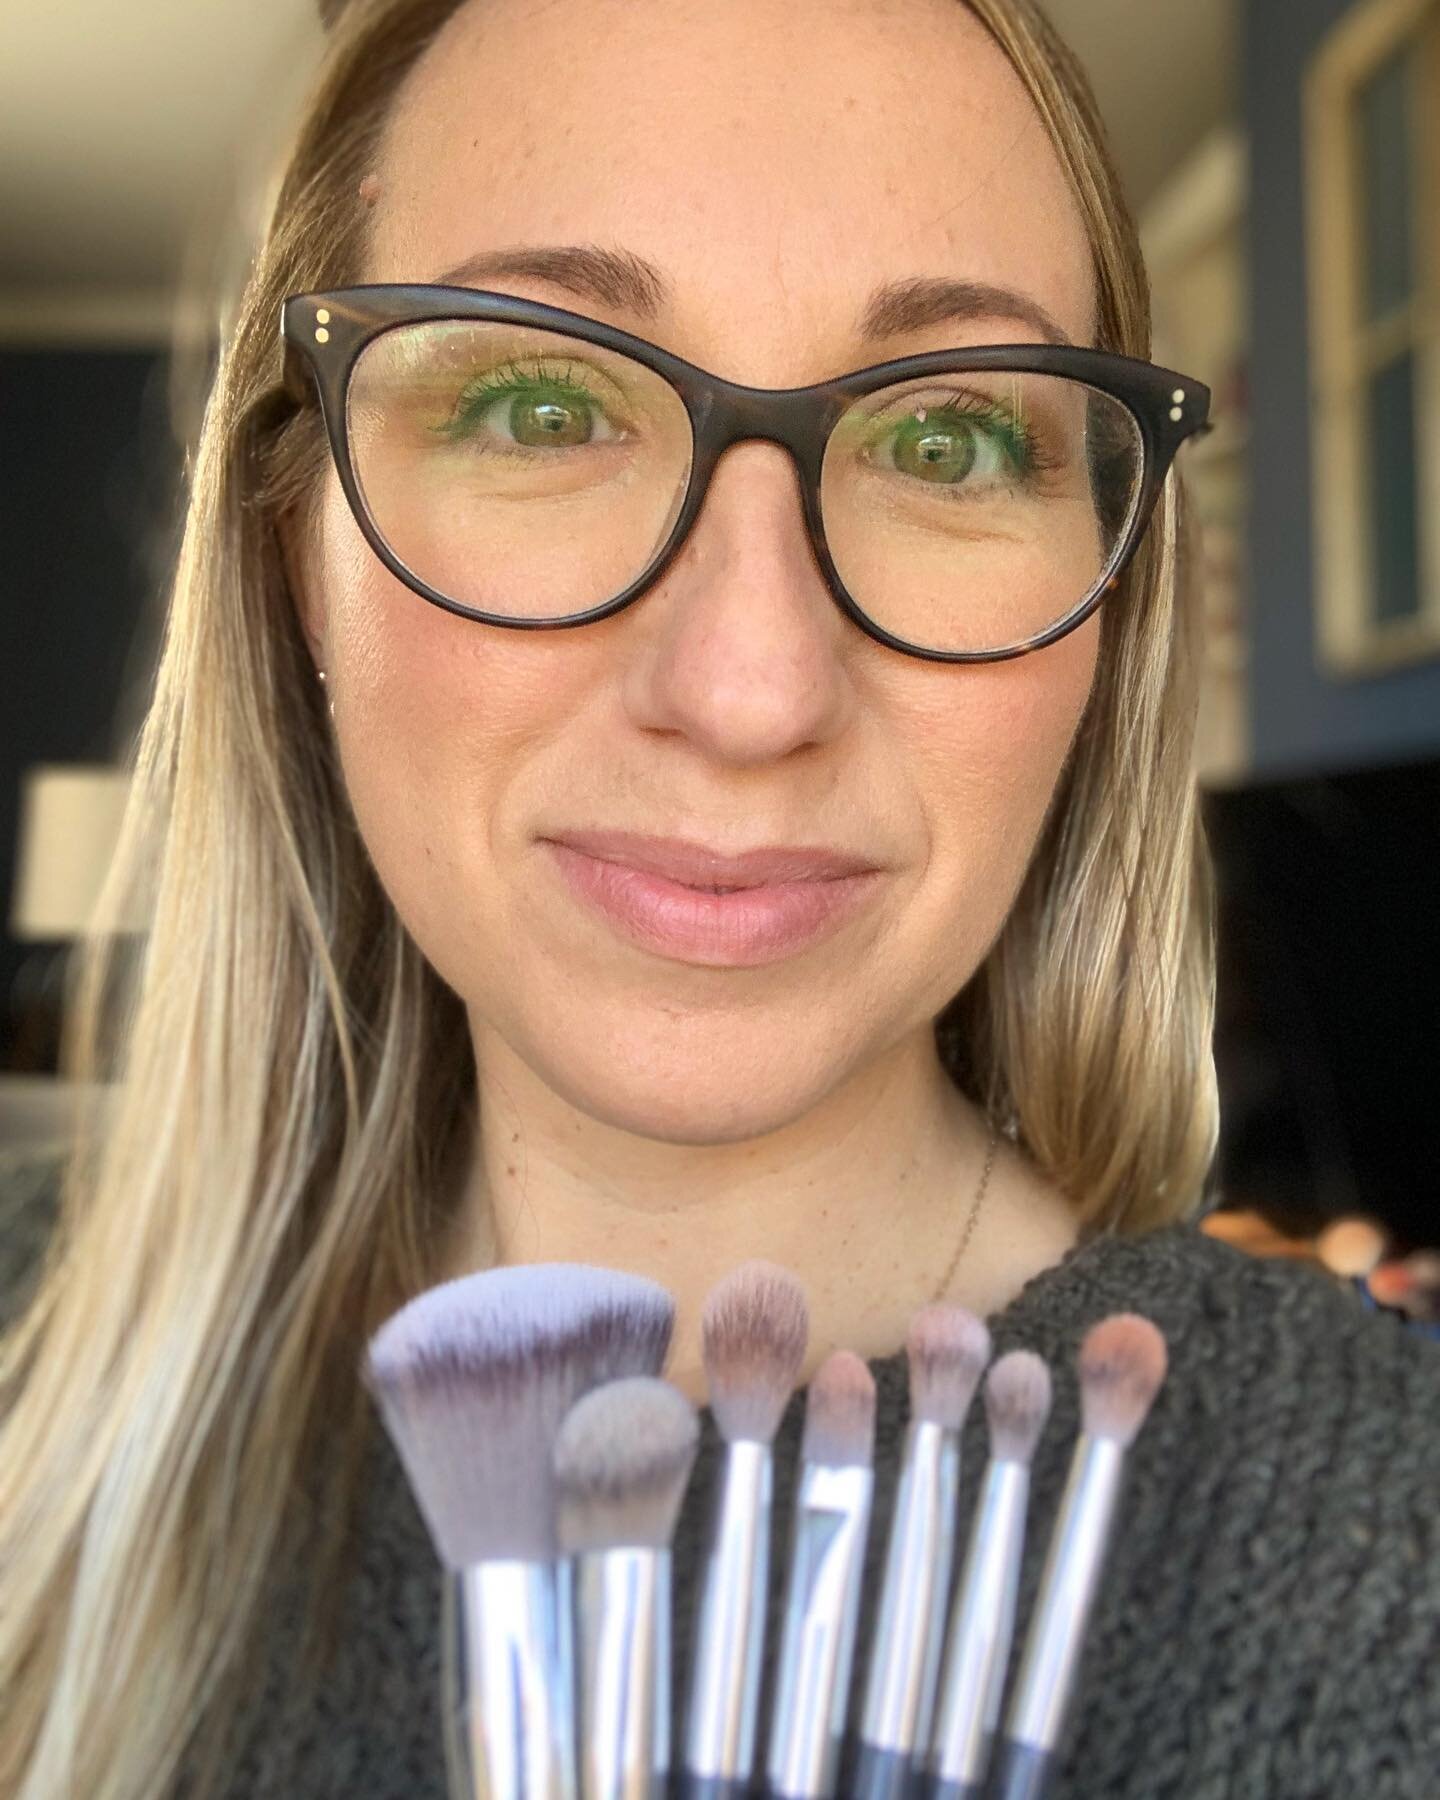 As a professional makeup artist, one thing I really value is the importance of quality brushes.

Not all makeup brushes are created equally. Believe me, I&rsquo;ve tried them all, and I always come back to @thebkbeauty brush sets. There&rsquo;s just 